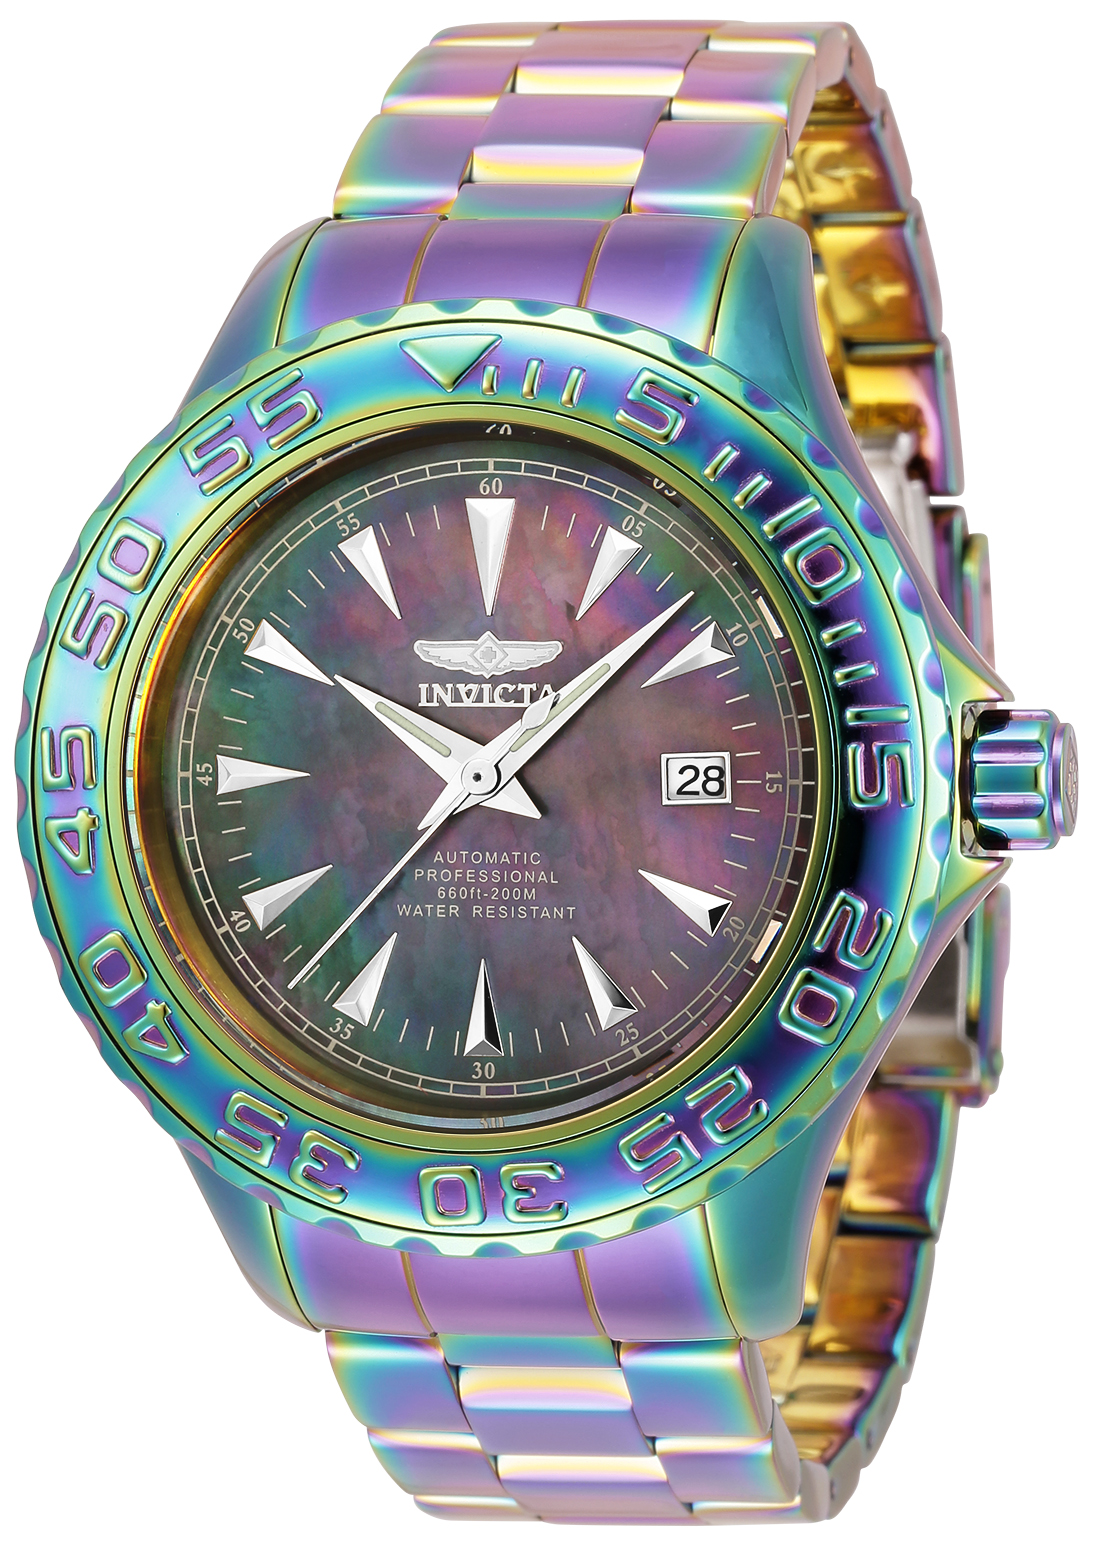 Invicta Pro Diver Automatic Men's Watch w/ Mother of Pearl Dial - 47mm, Iridescent (34106)